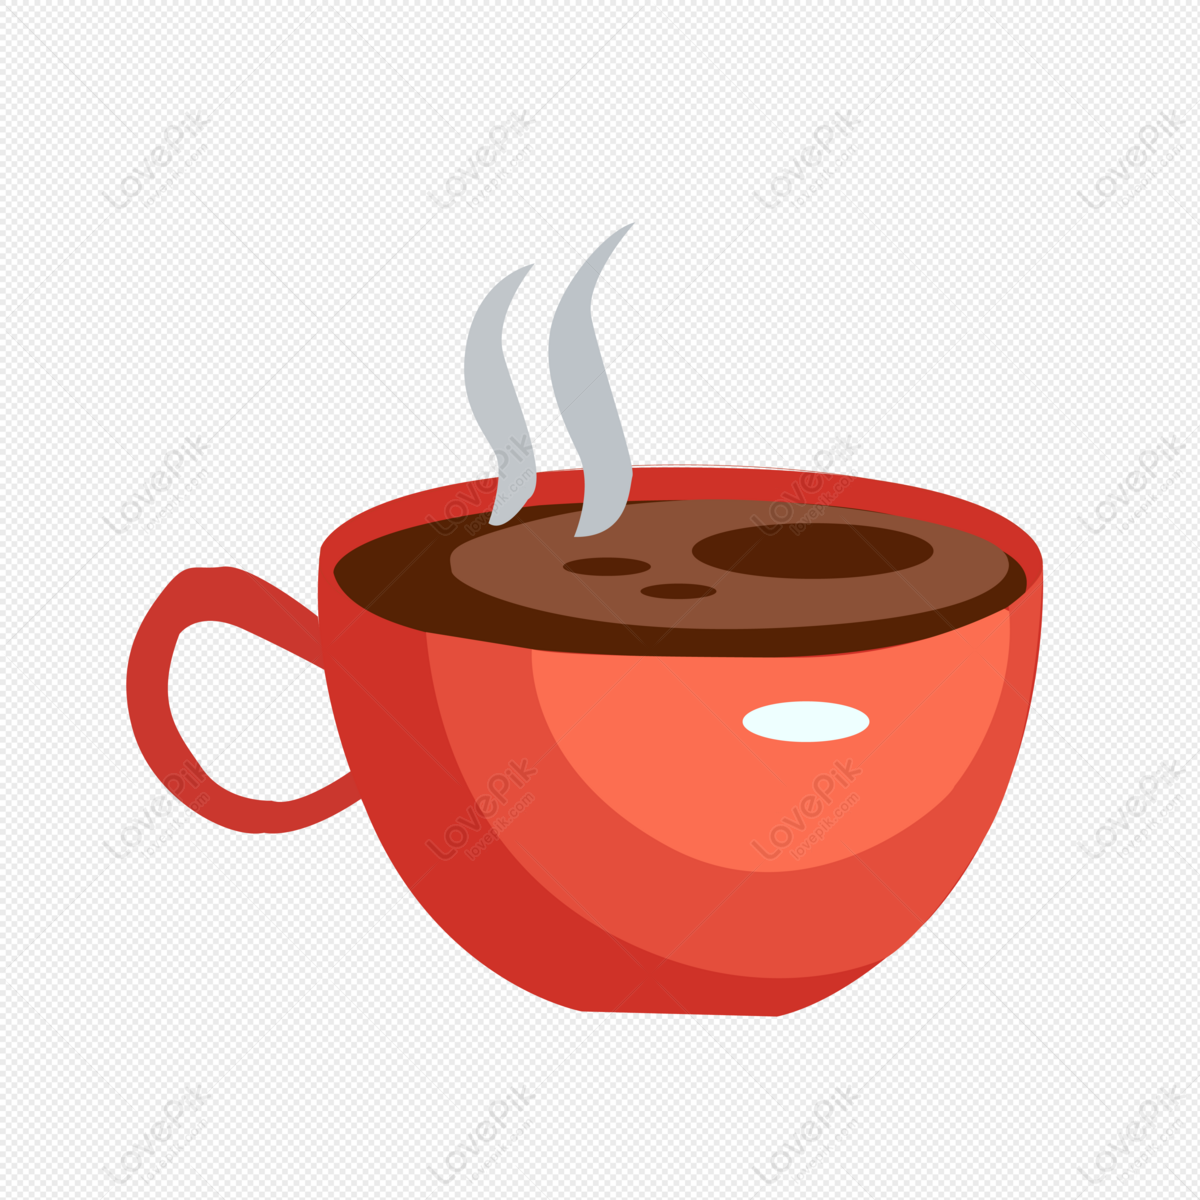 https://img.lovepik.com/free-png/20220124/lovepik-a-cup-of-coffee-png-image_401709630_wh1200.png